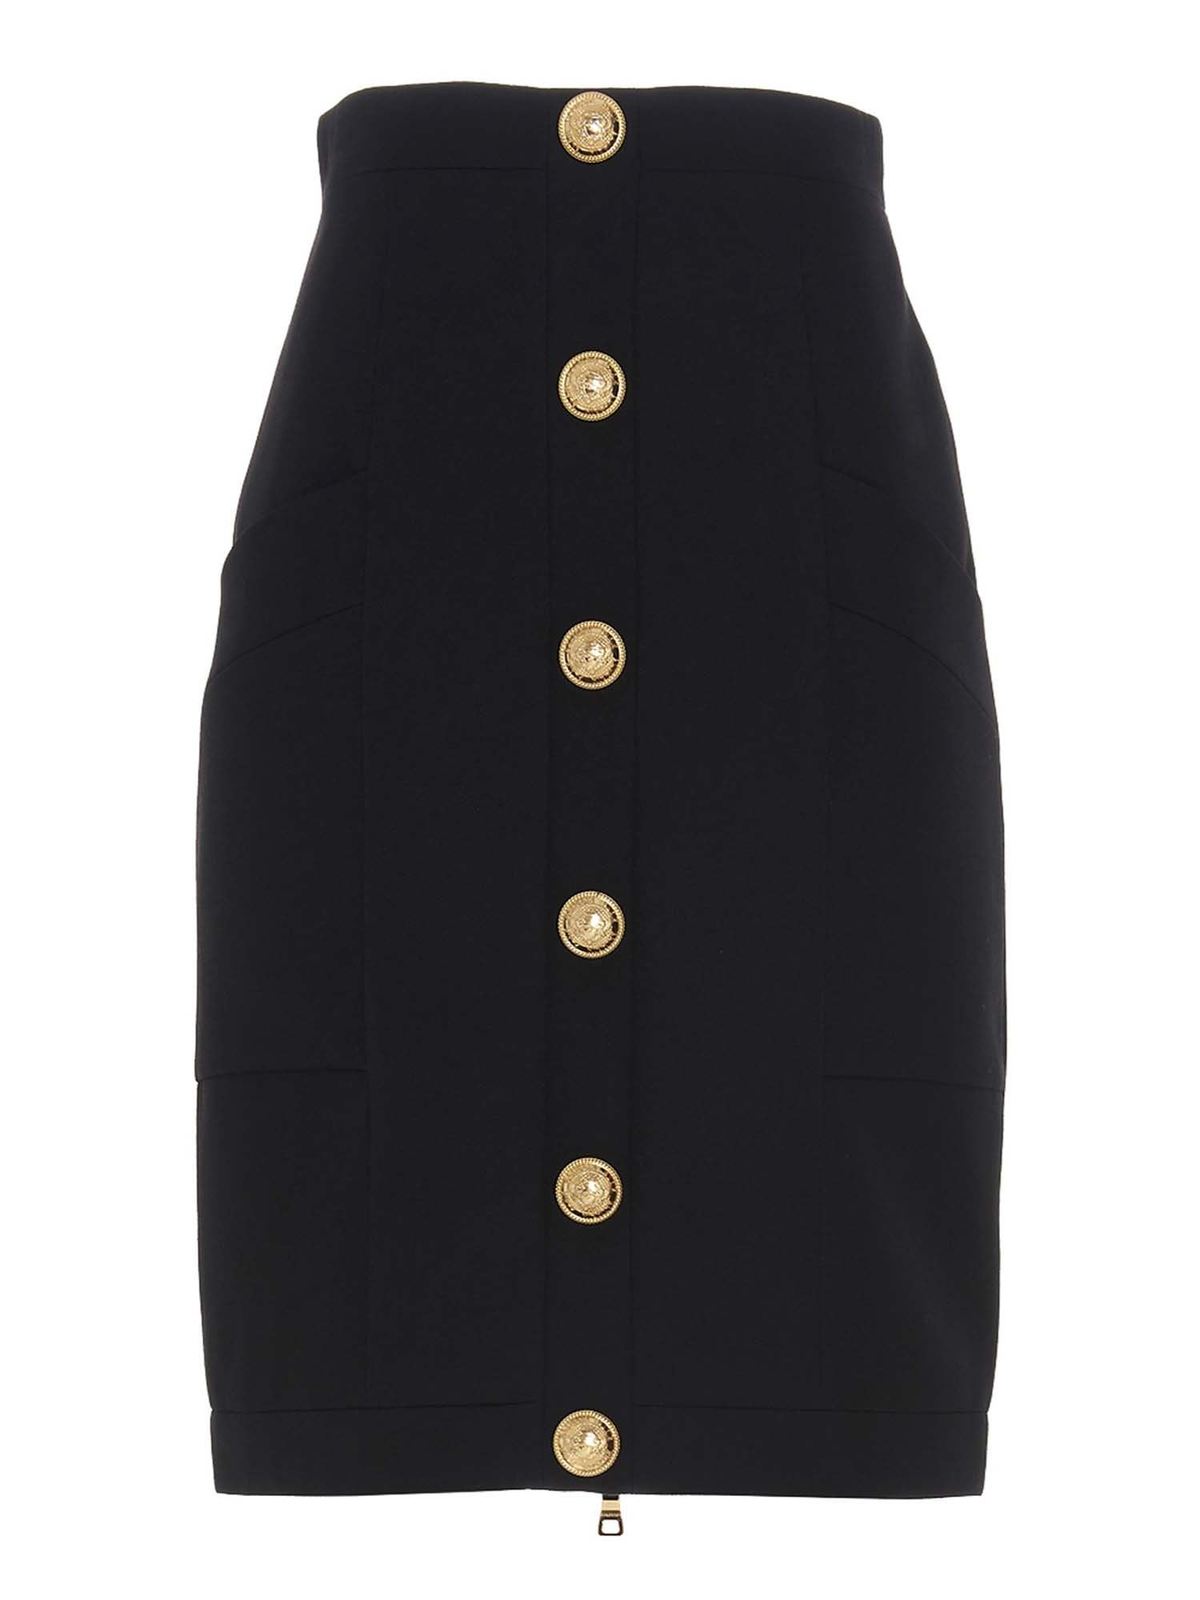 BALMAIN GOLD COLORED BUTTONS SKIRT IN BLACK